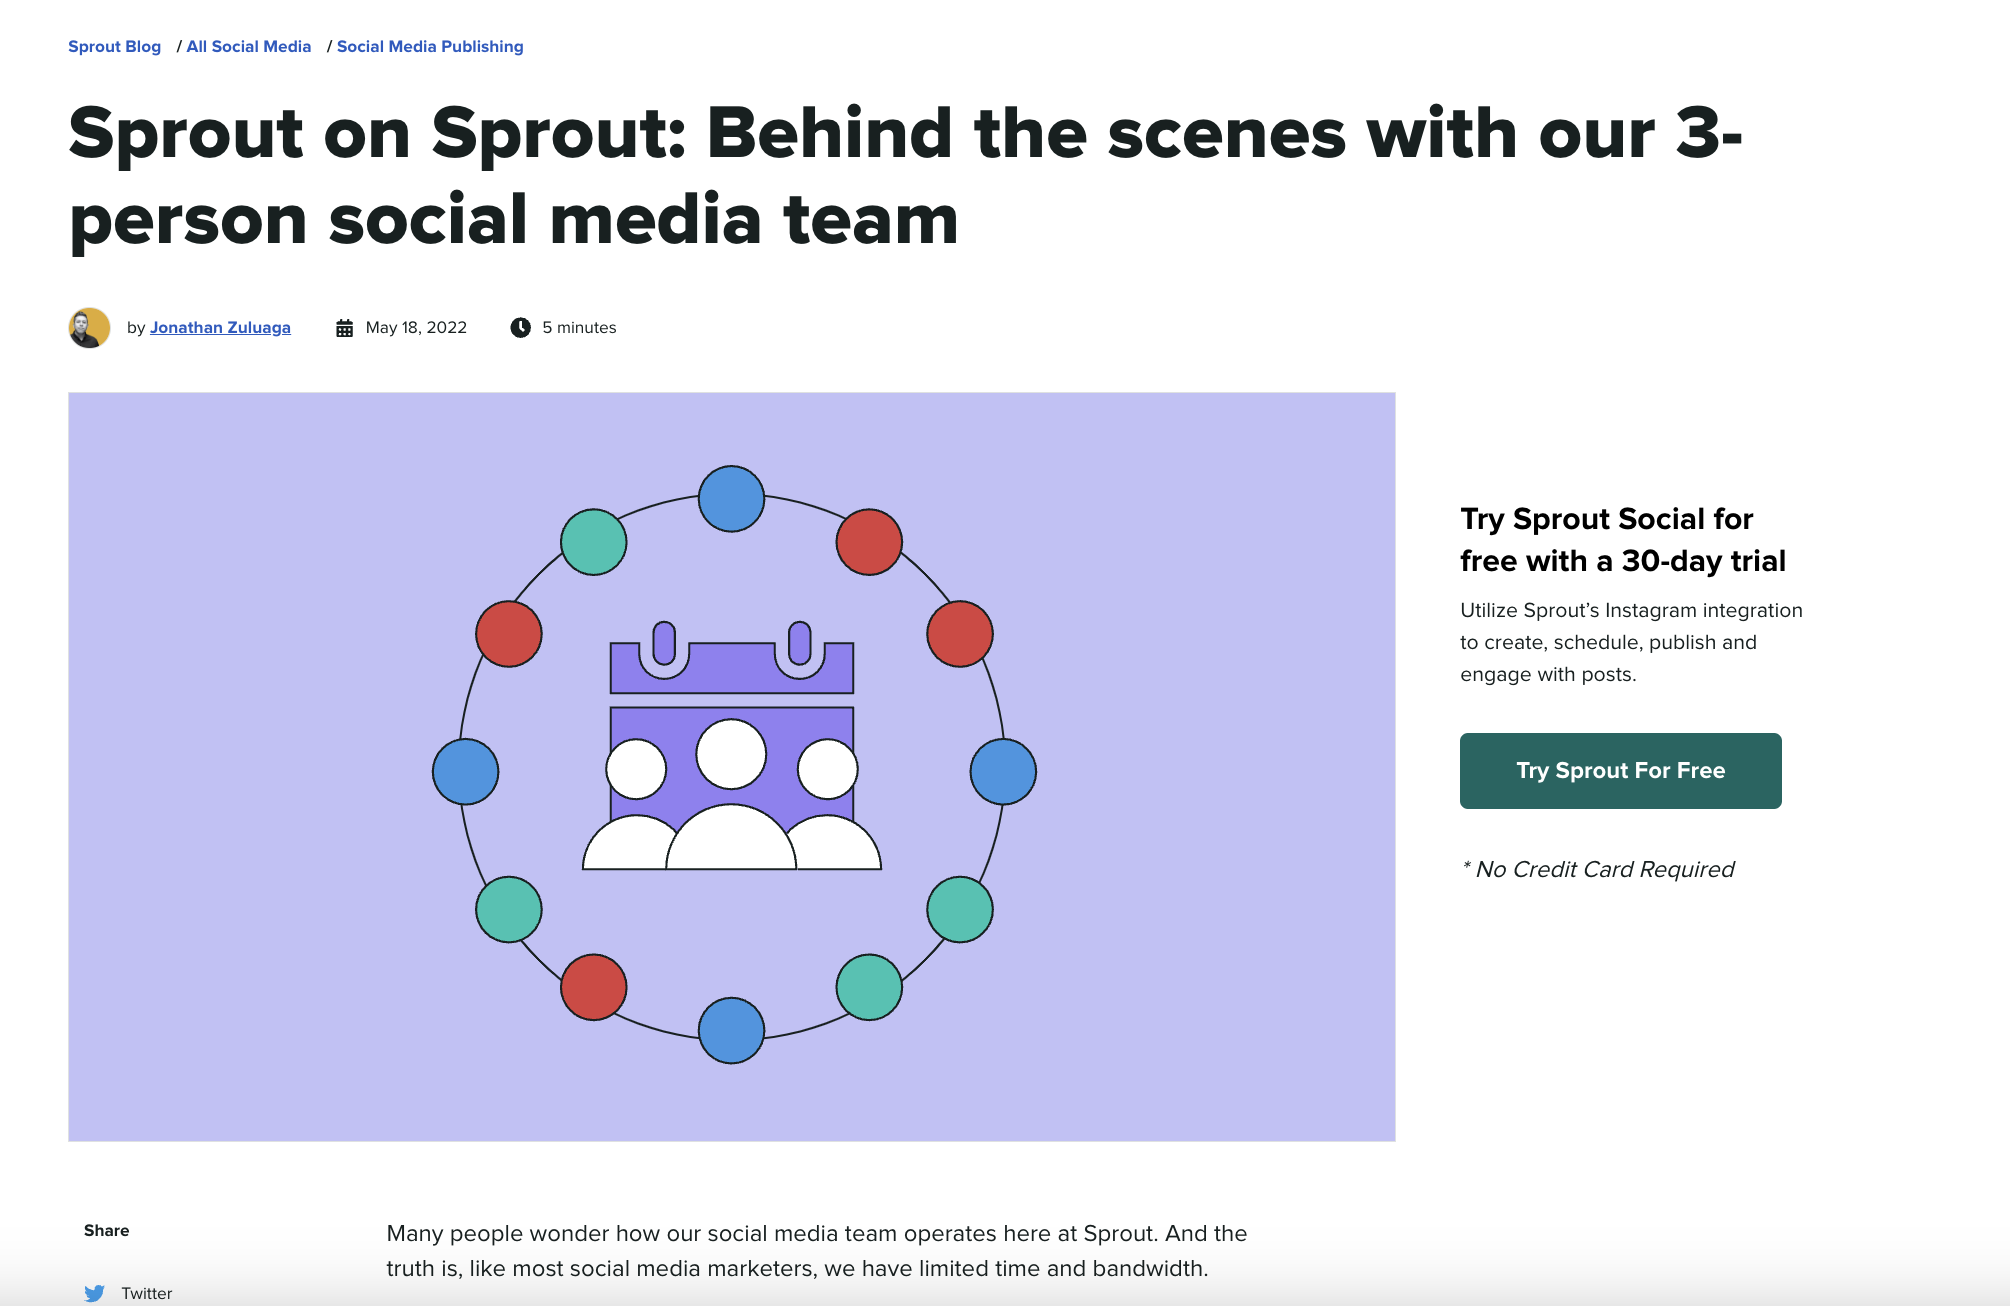 An Insights blog article titled, "Sprout on Sprout: Behind the scenes with our 3-person social media team."